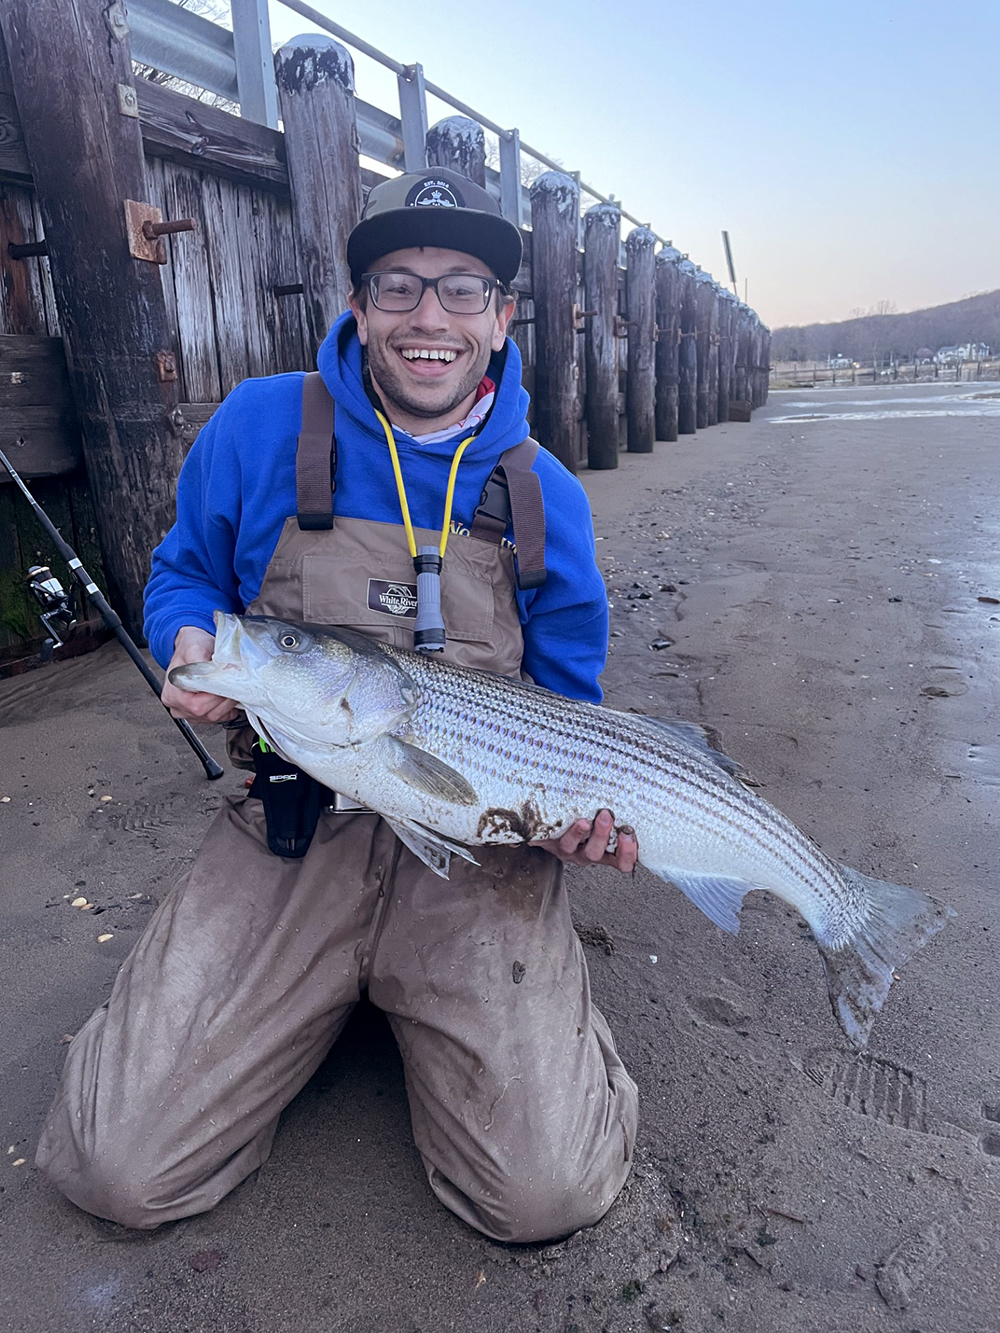 An image of Josh McGilly on a beach holding a large striped bass